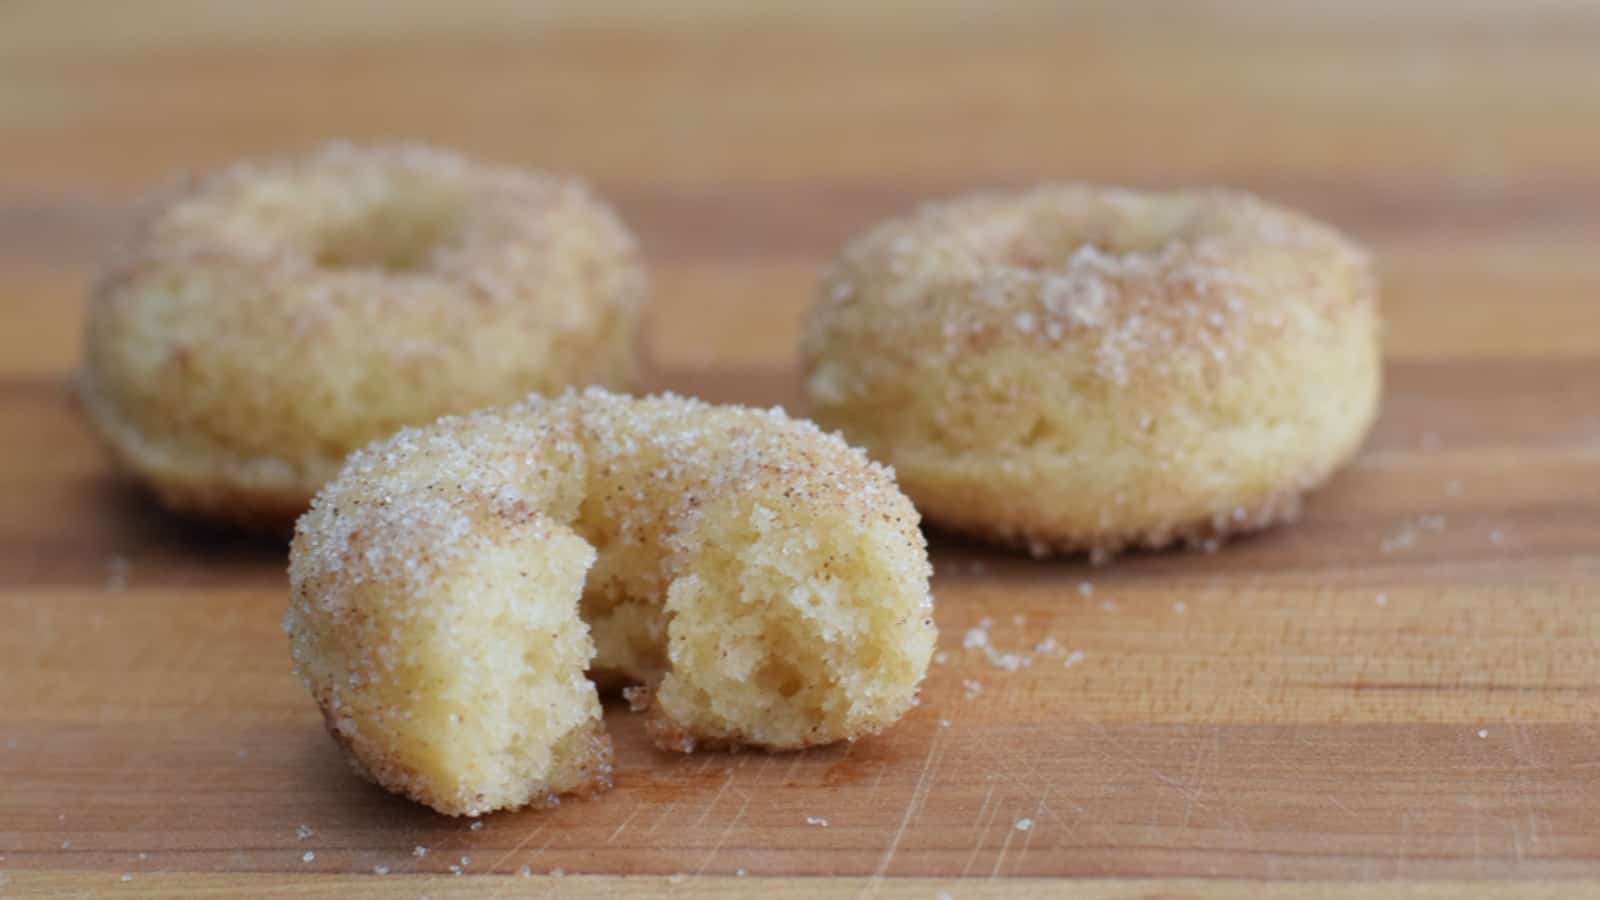 Image shows Baked cinnamon sugar donuts on a wooden table.